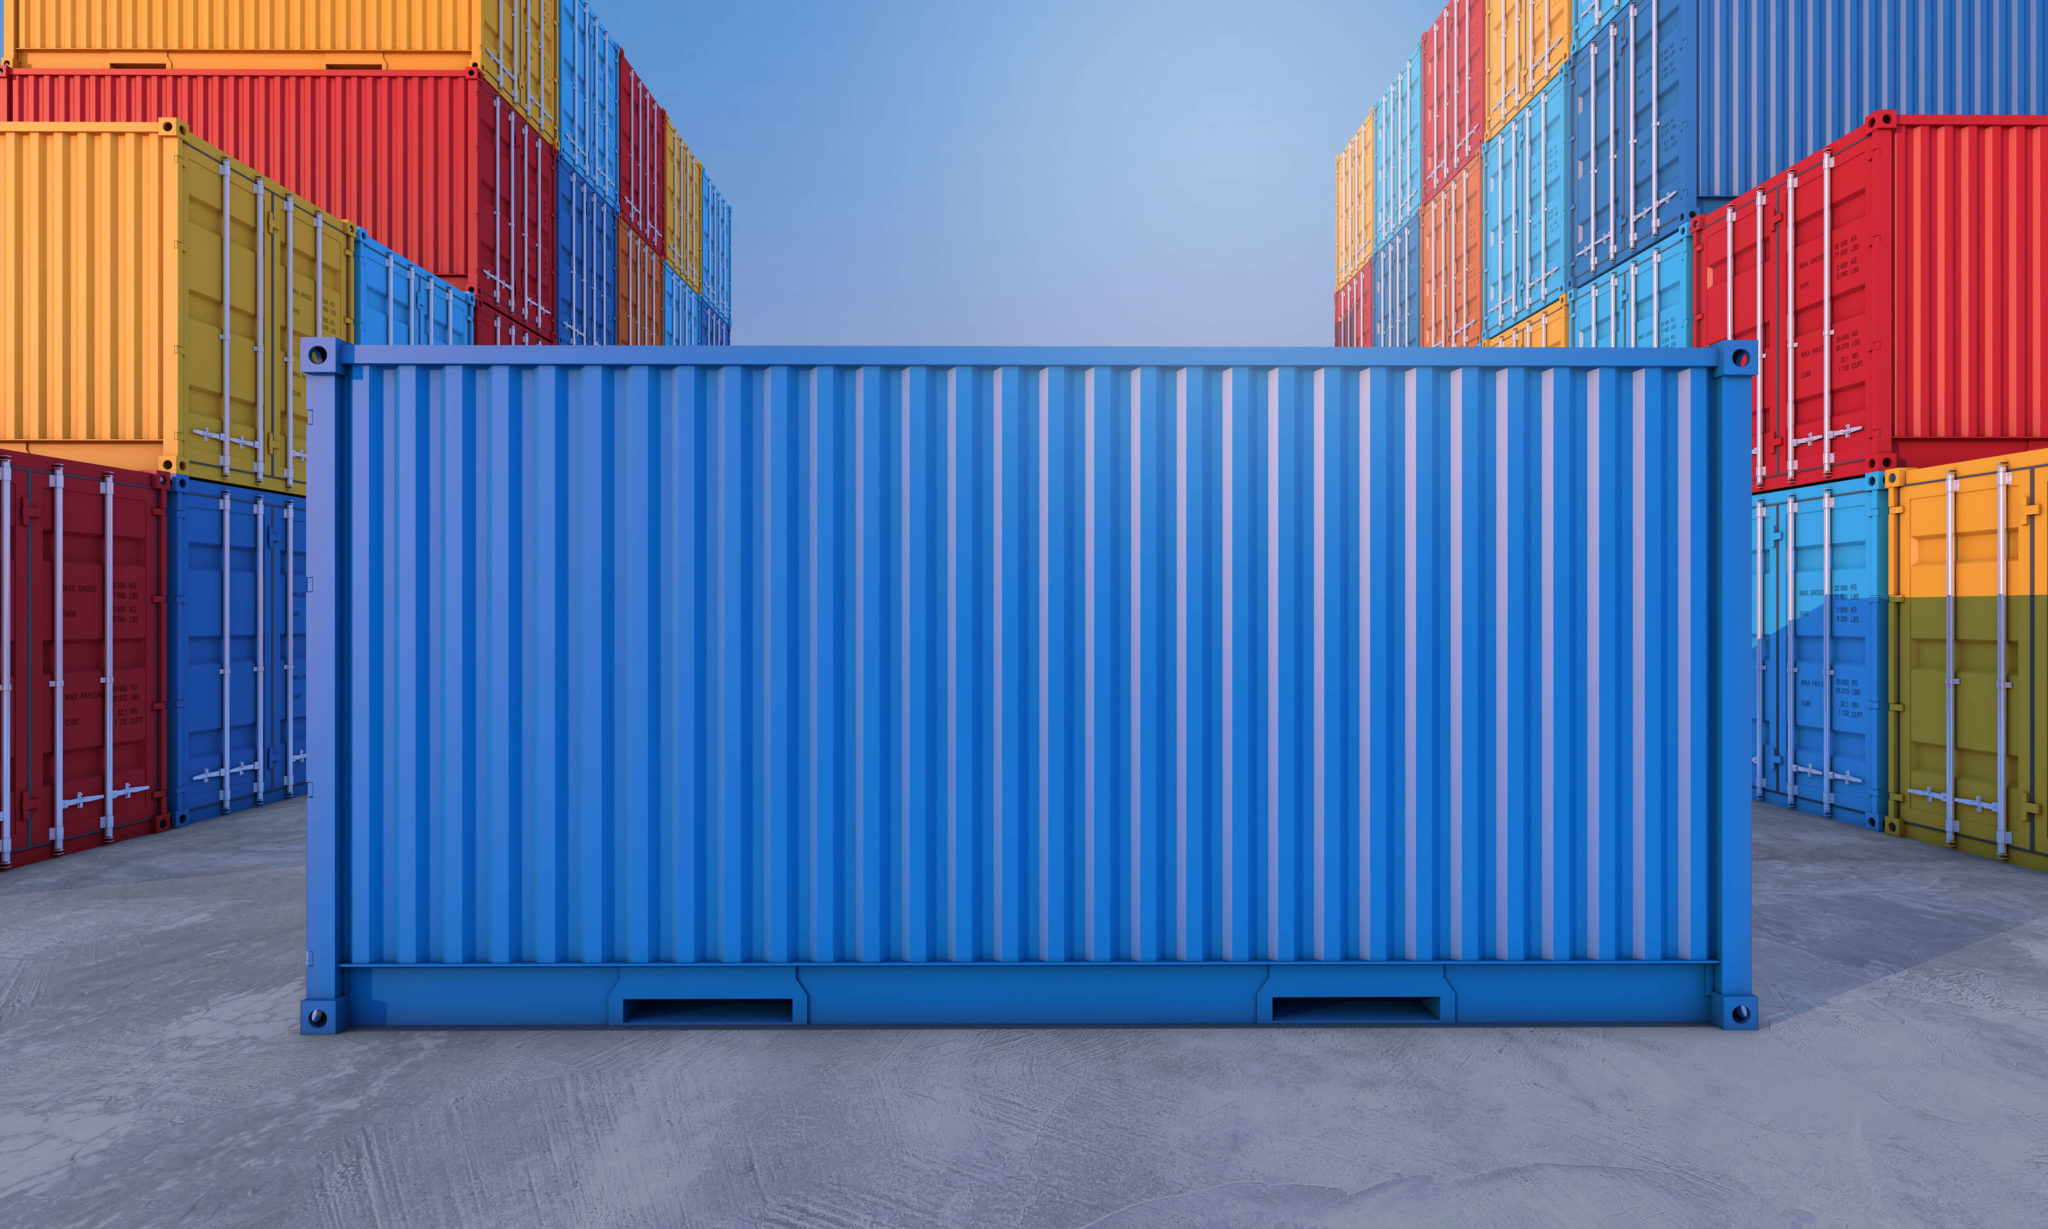 Storage containers for sale near me Carlsbad, Shipping Containers for Sale, CONEX Shipping Containers for Sale, Carlsbad Container Sales, Carlsbad Storage Containers Sale, Buy Storage Containers Carlsbad